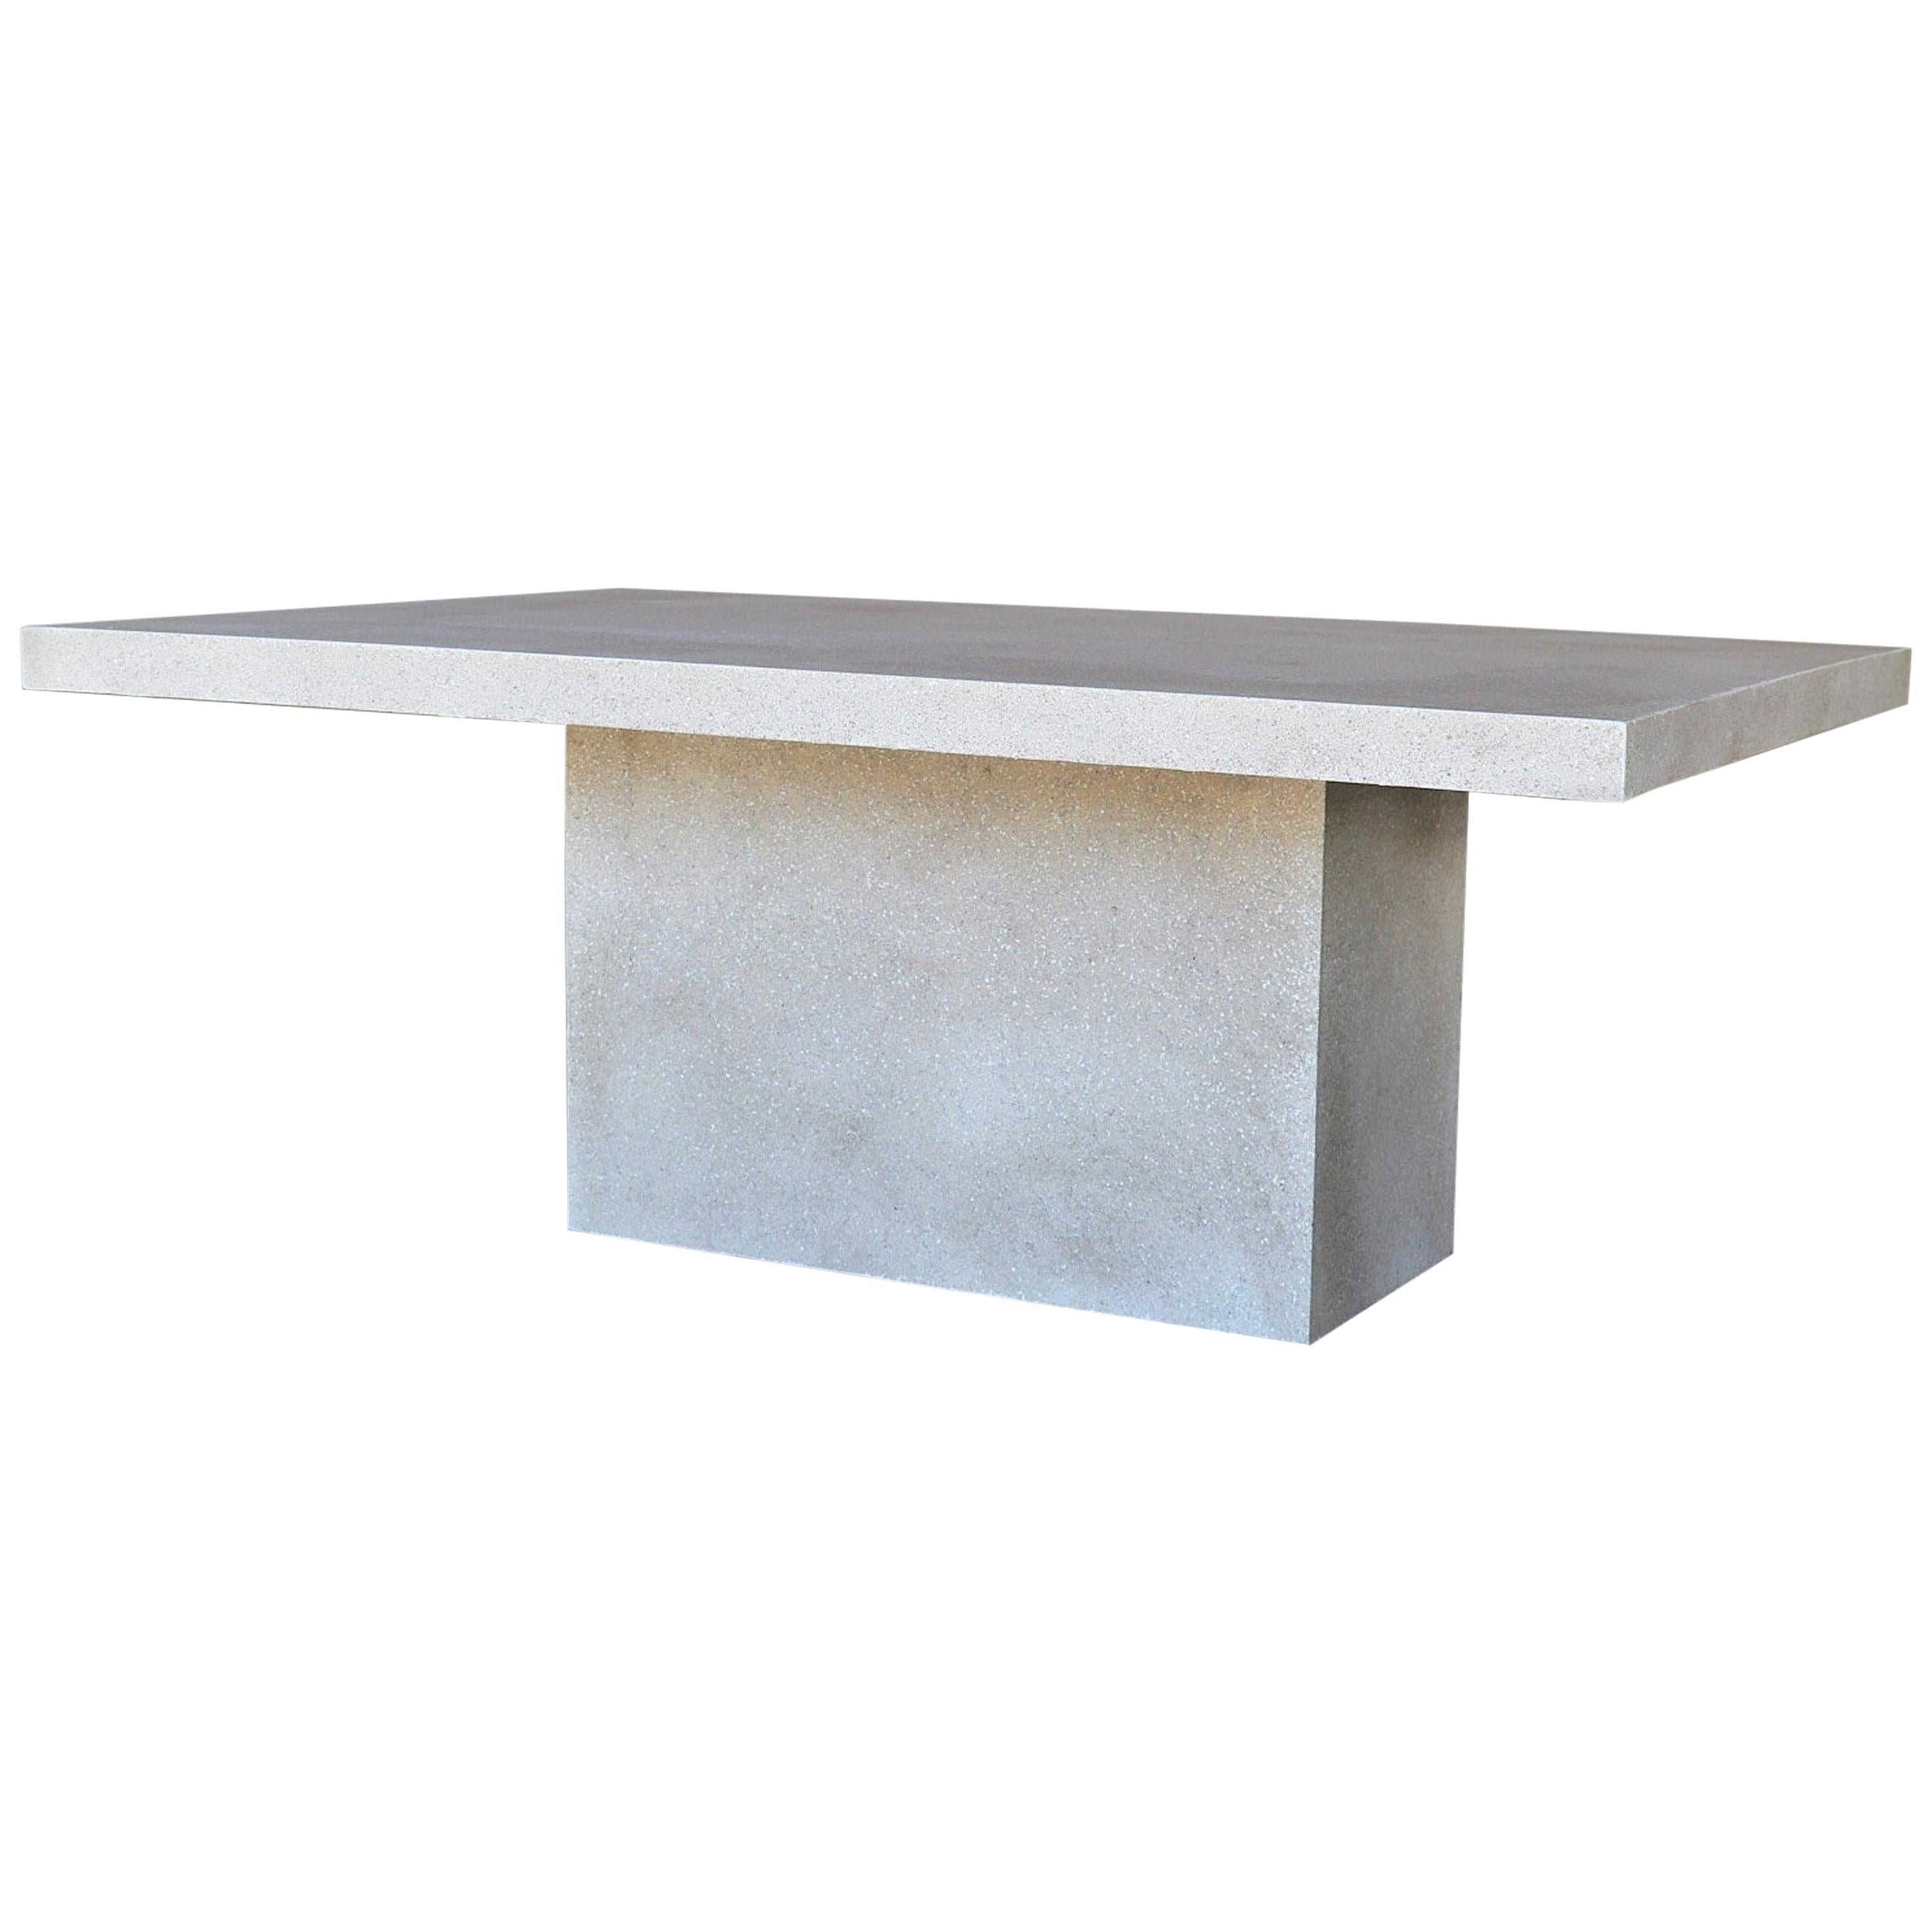 Cast Resin 'Slab' Dining Table, Aged Finish by Zachary A. Design For Sale